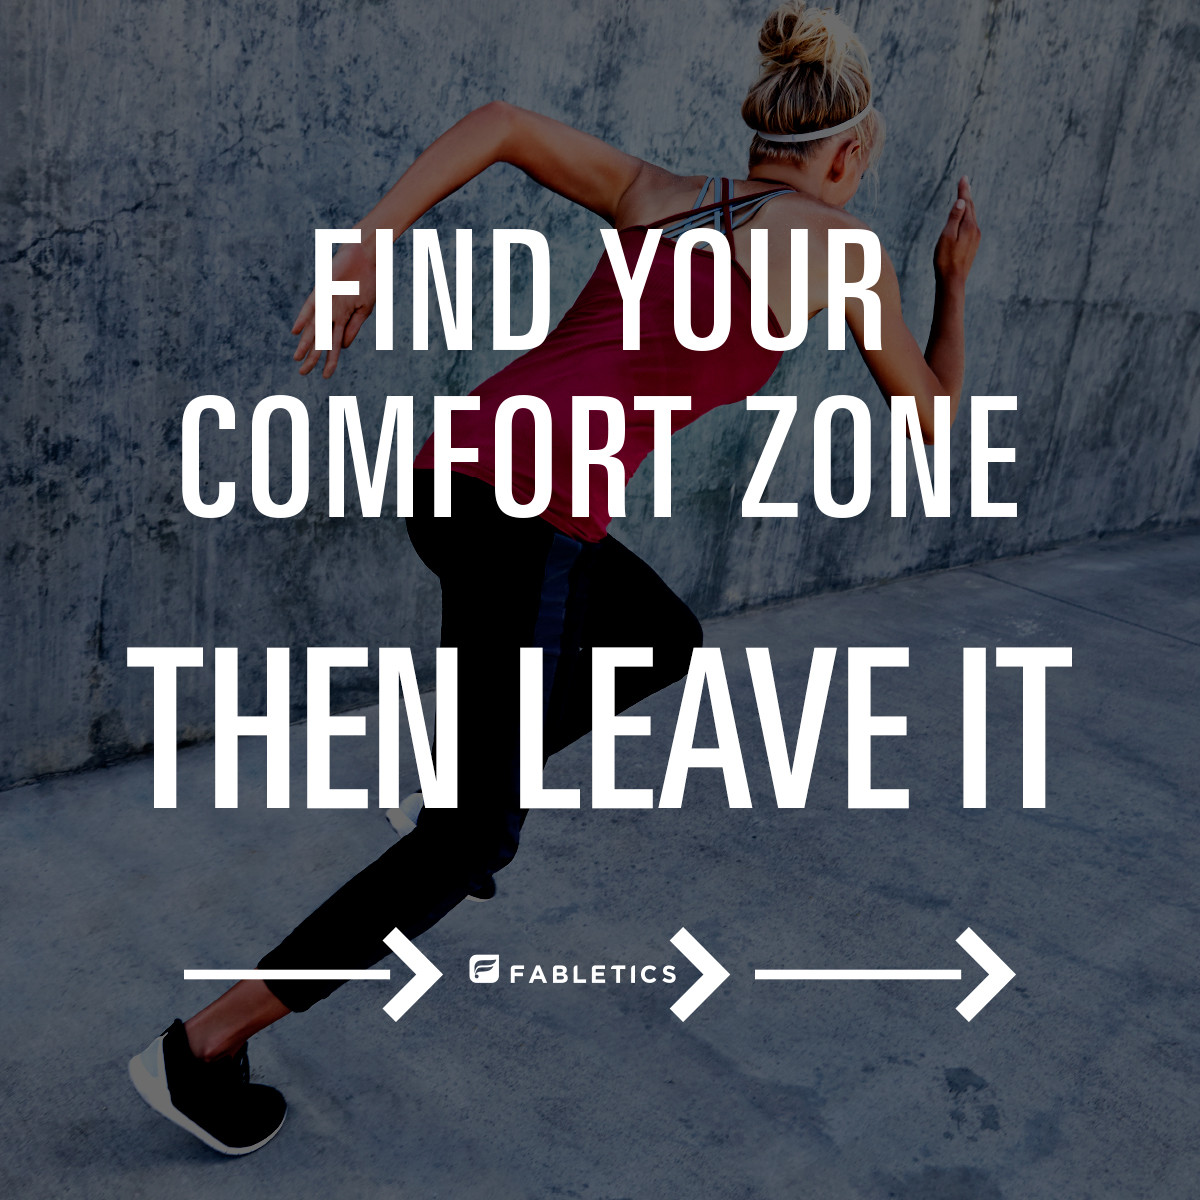 Inspirational Gym Quotes
 The Best Health and Fitness Quotes